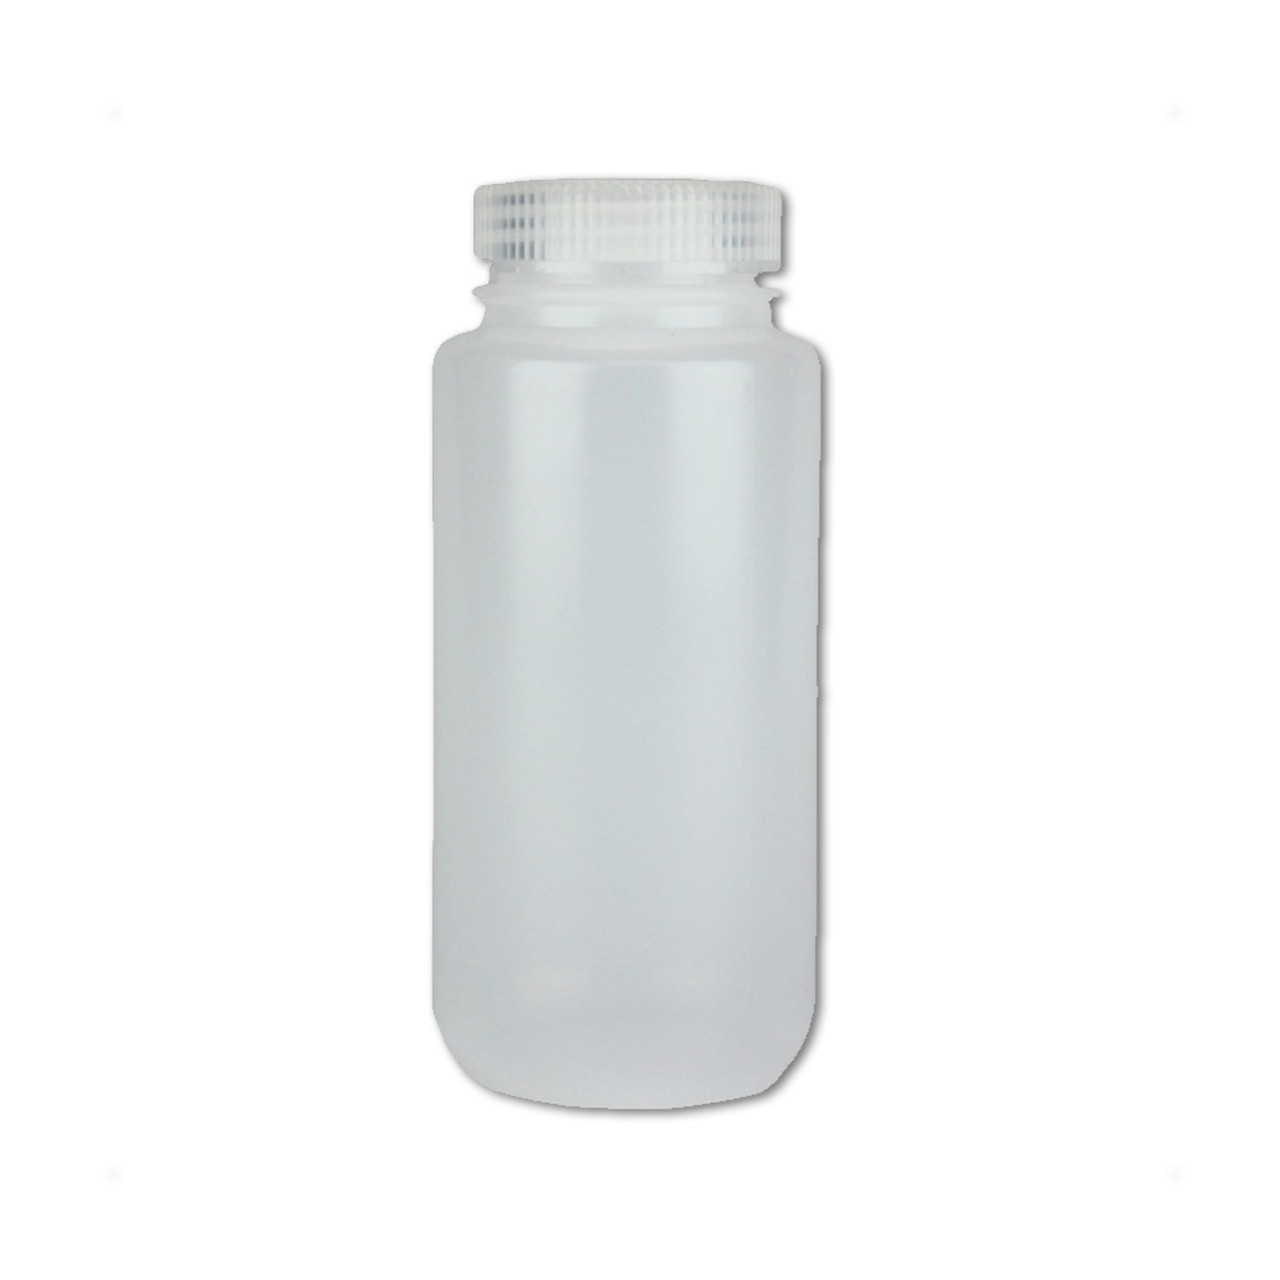 Disposable Recyclable Juice bottle & Containers 16 oz